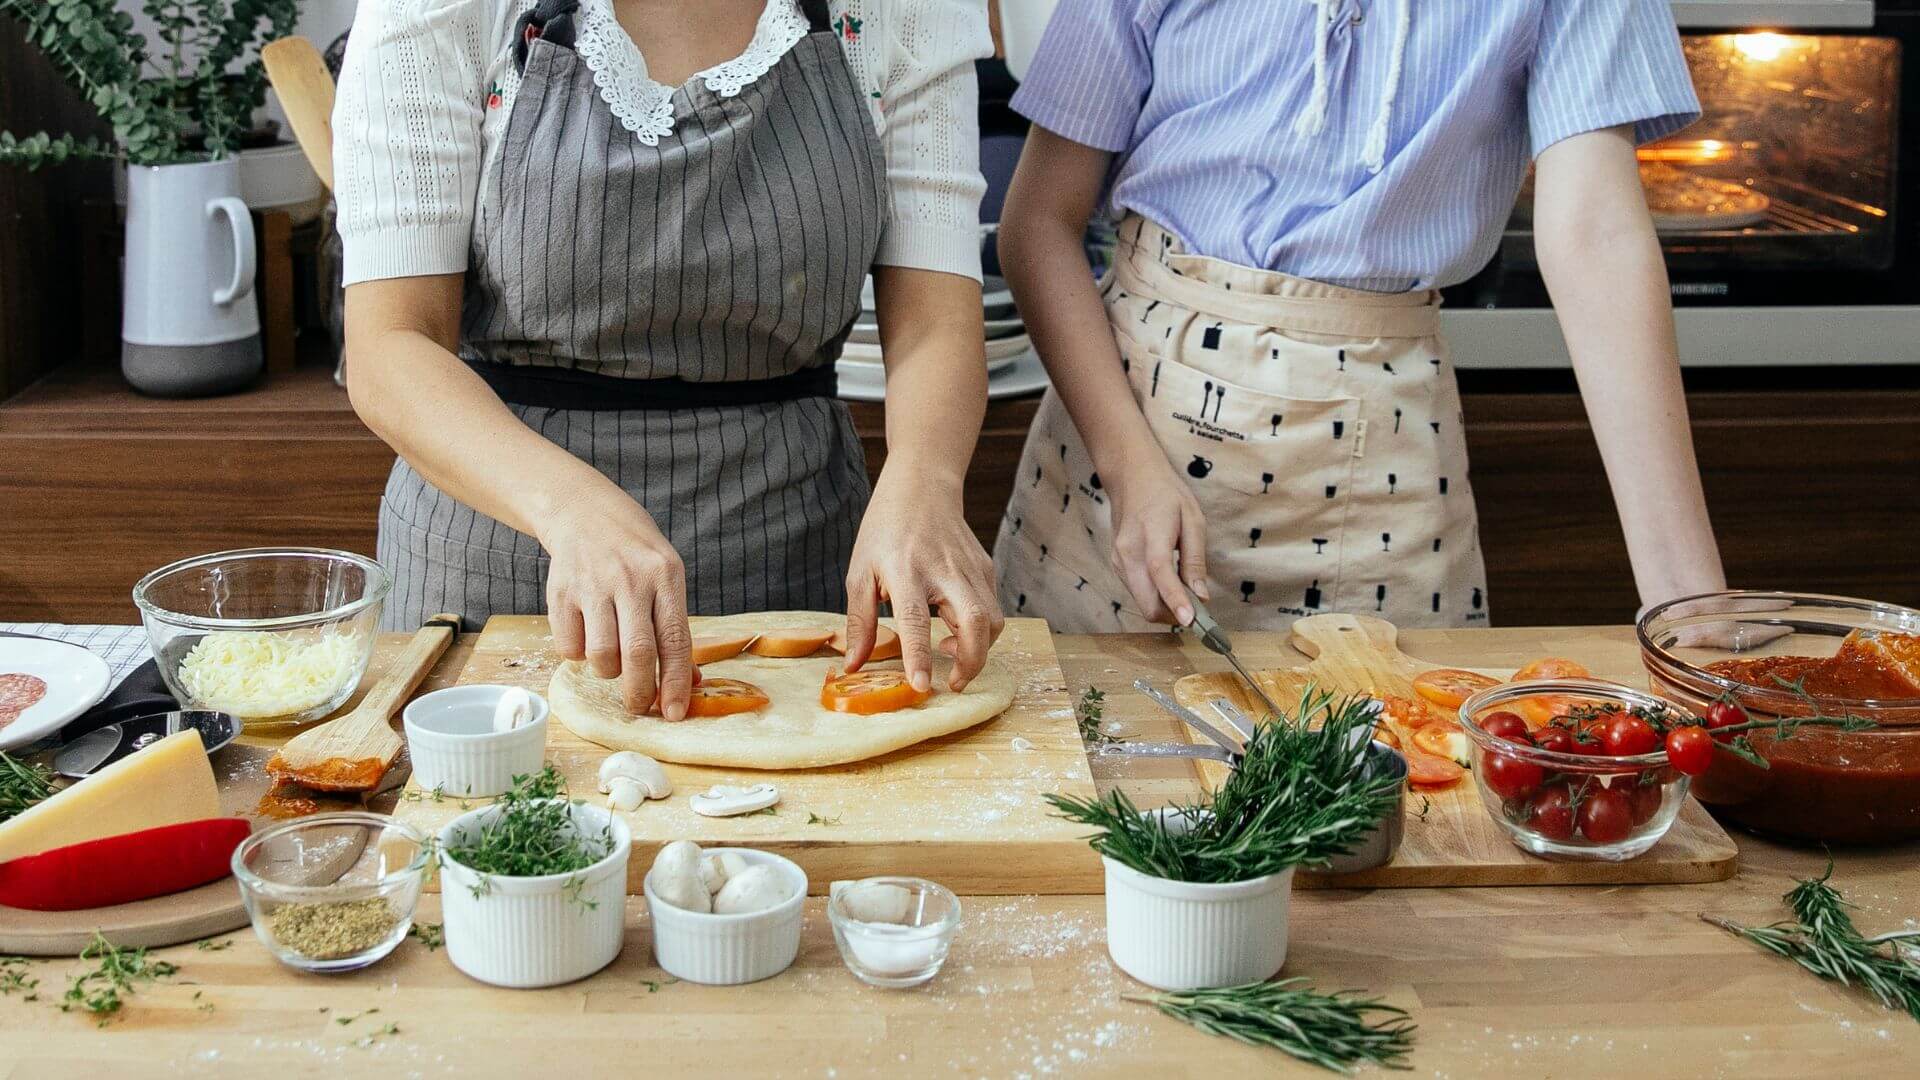 Easy Ways to Improve Your Cooking Skills